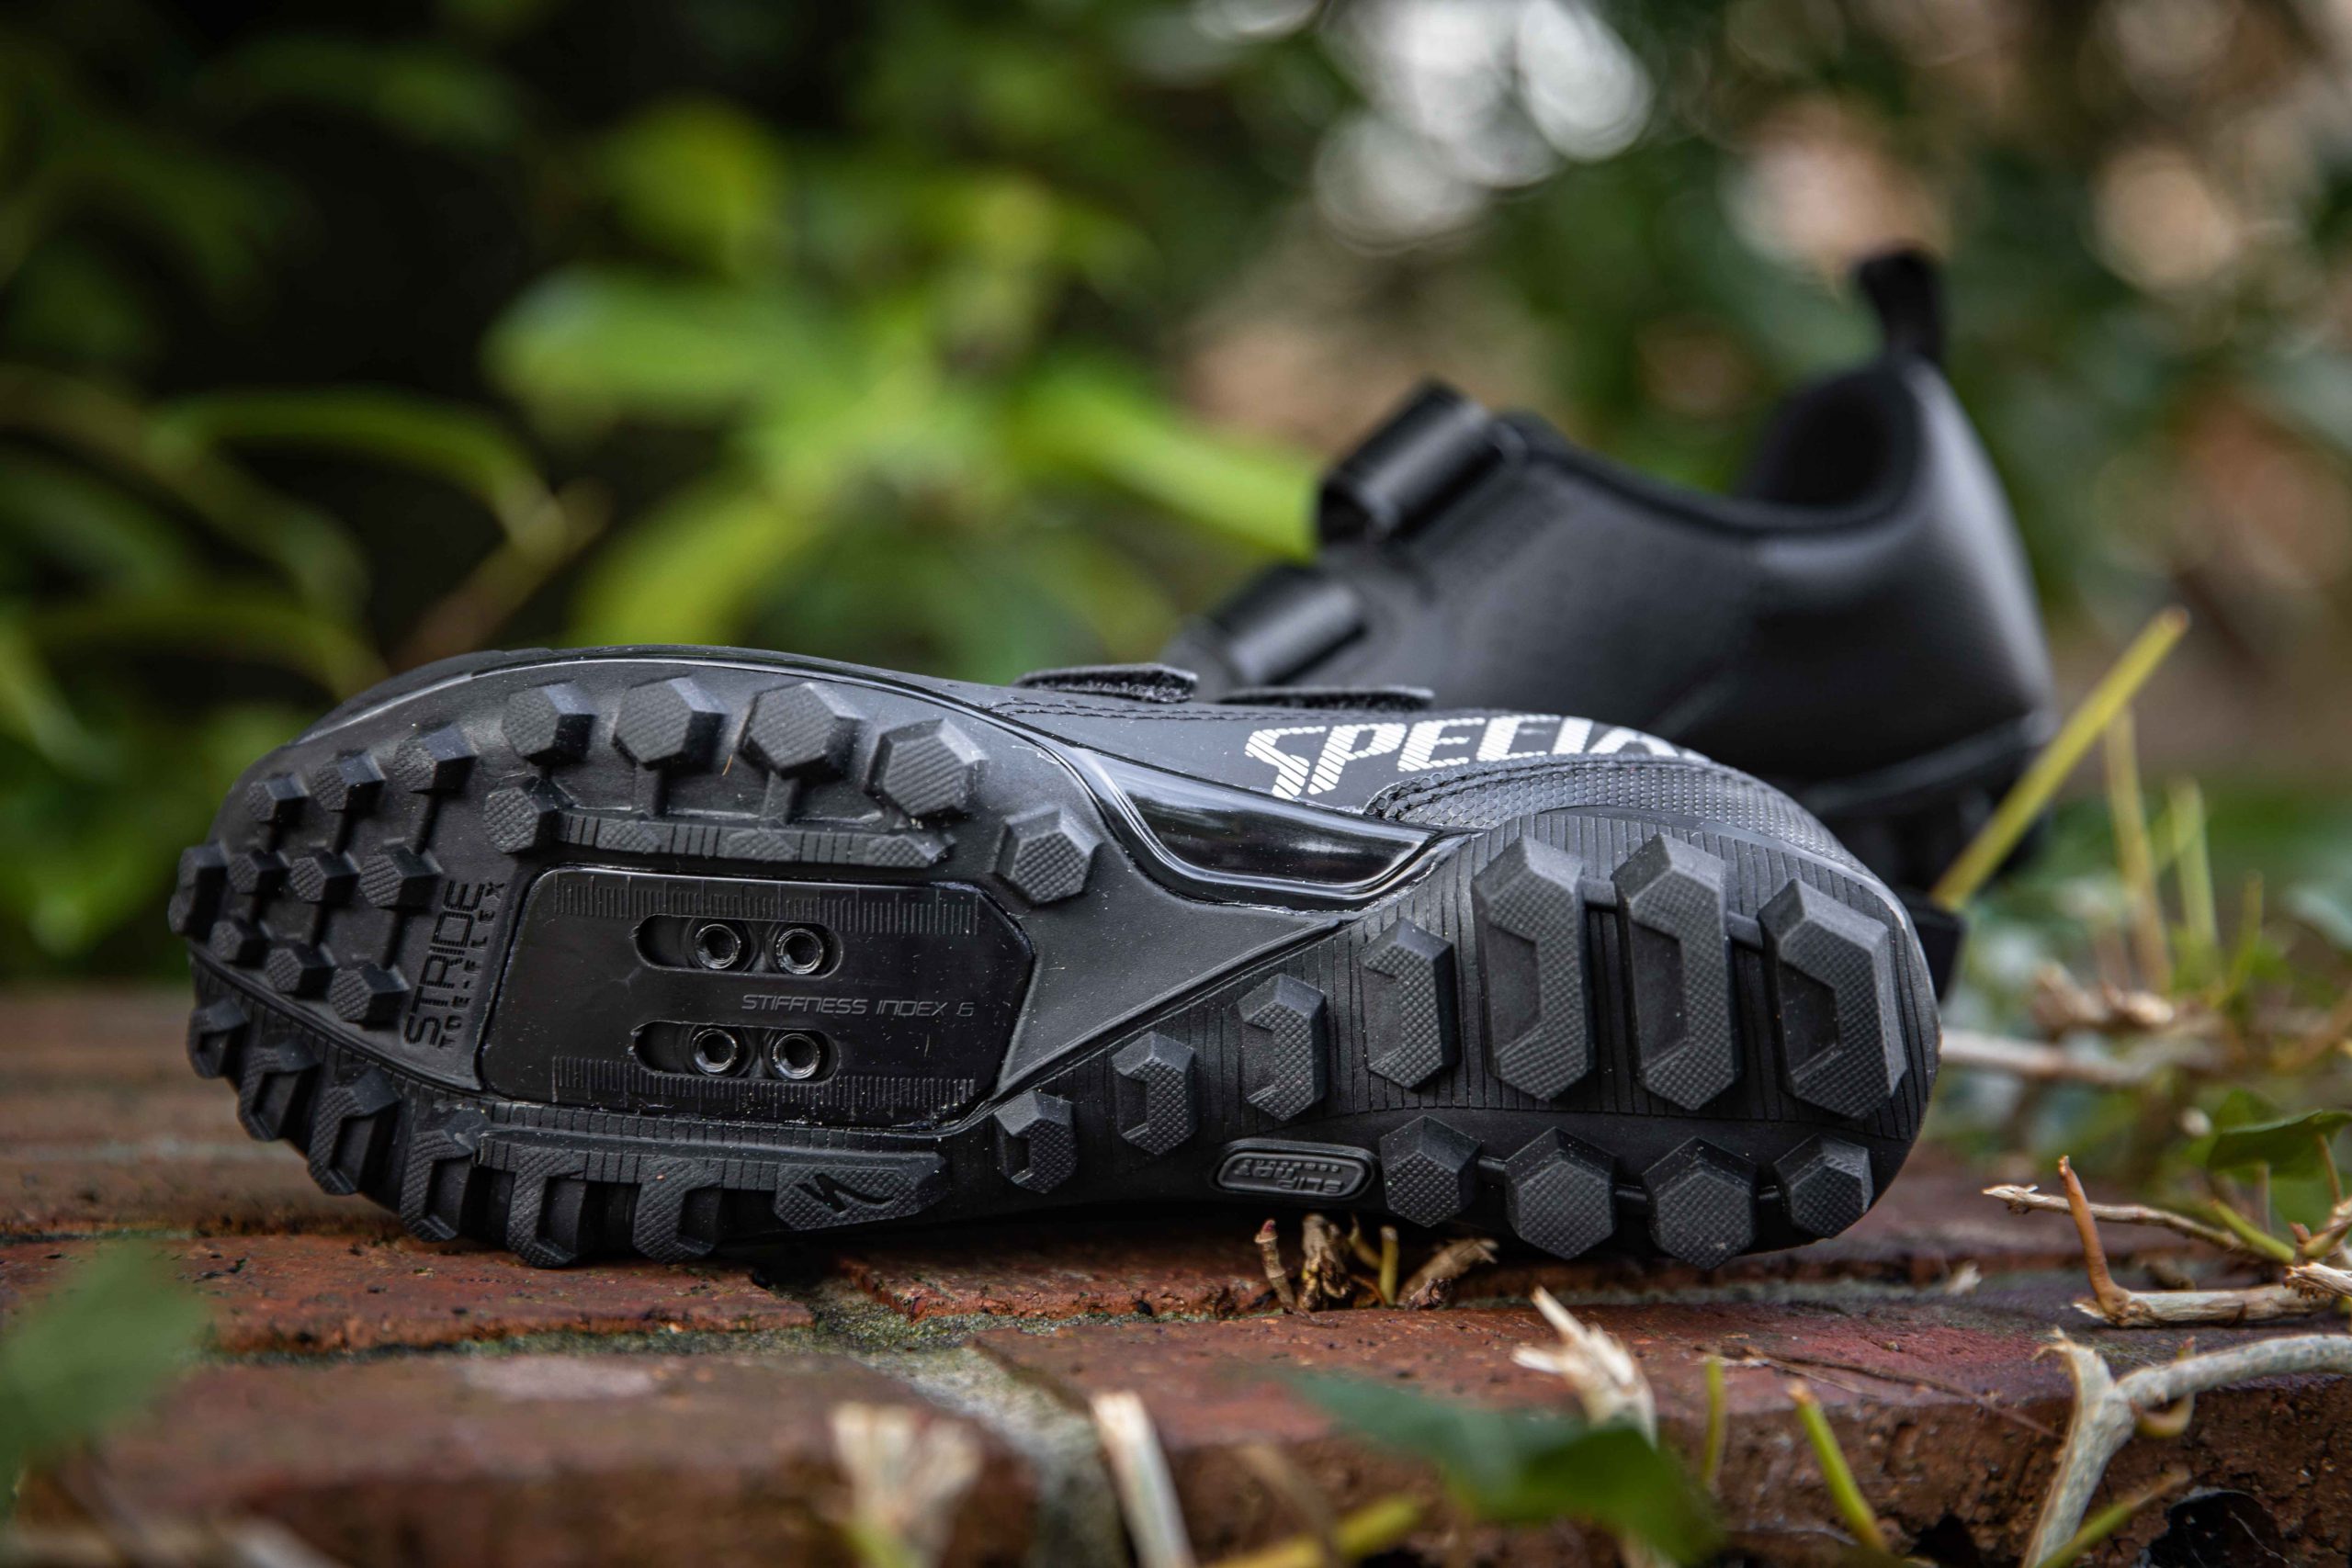 The New Specialized Recon 1.0 MTB Shoe Review | Cyclestore Blog